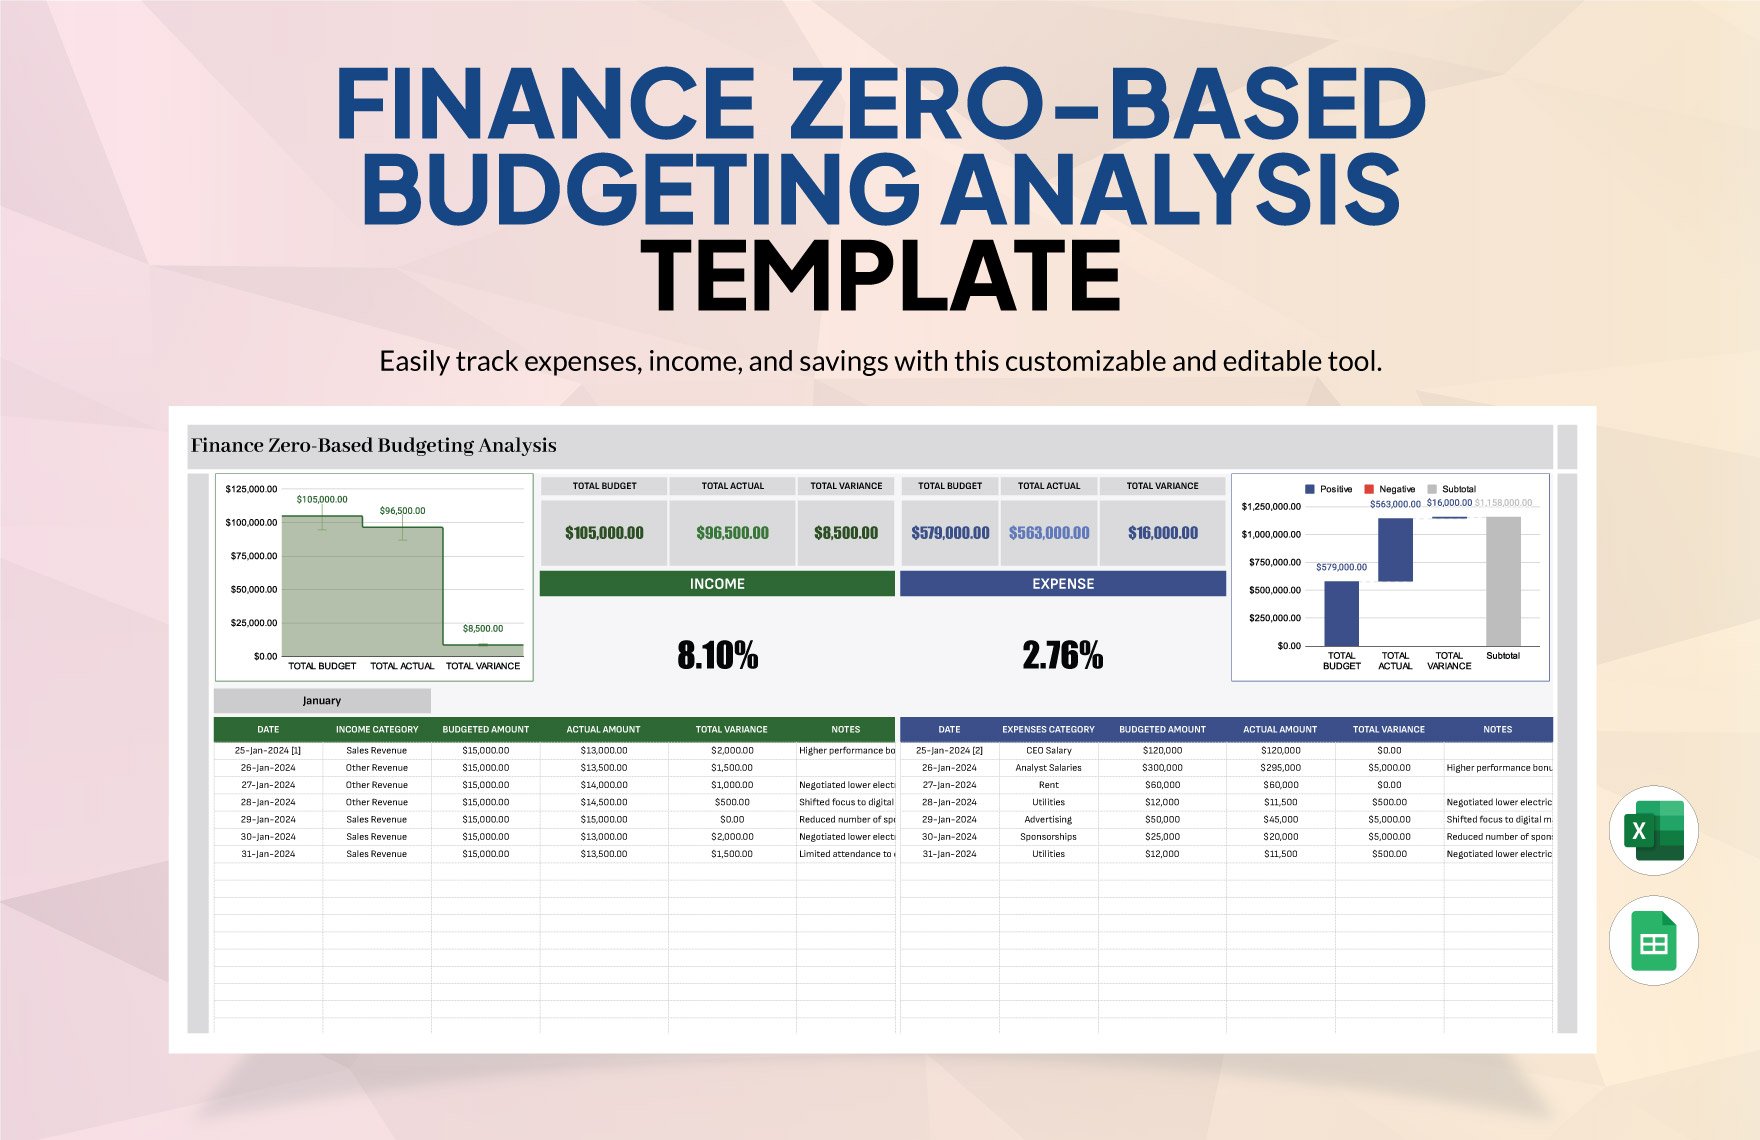 Finance Zero-Based Budgeting Analysis Template in Excel, Google Sheets